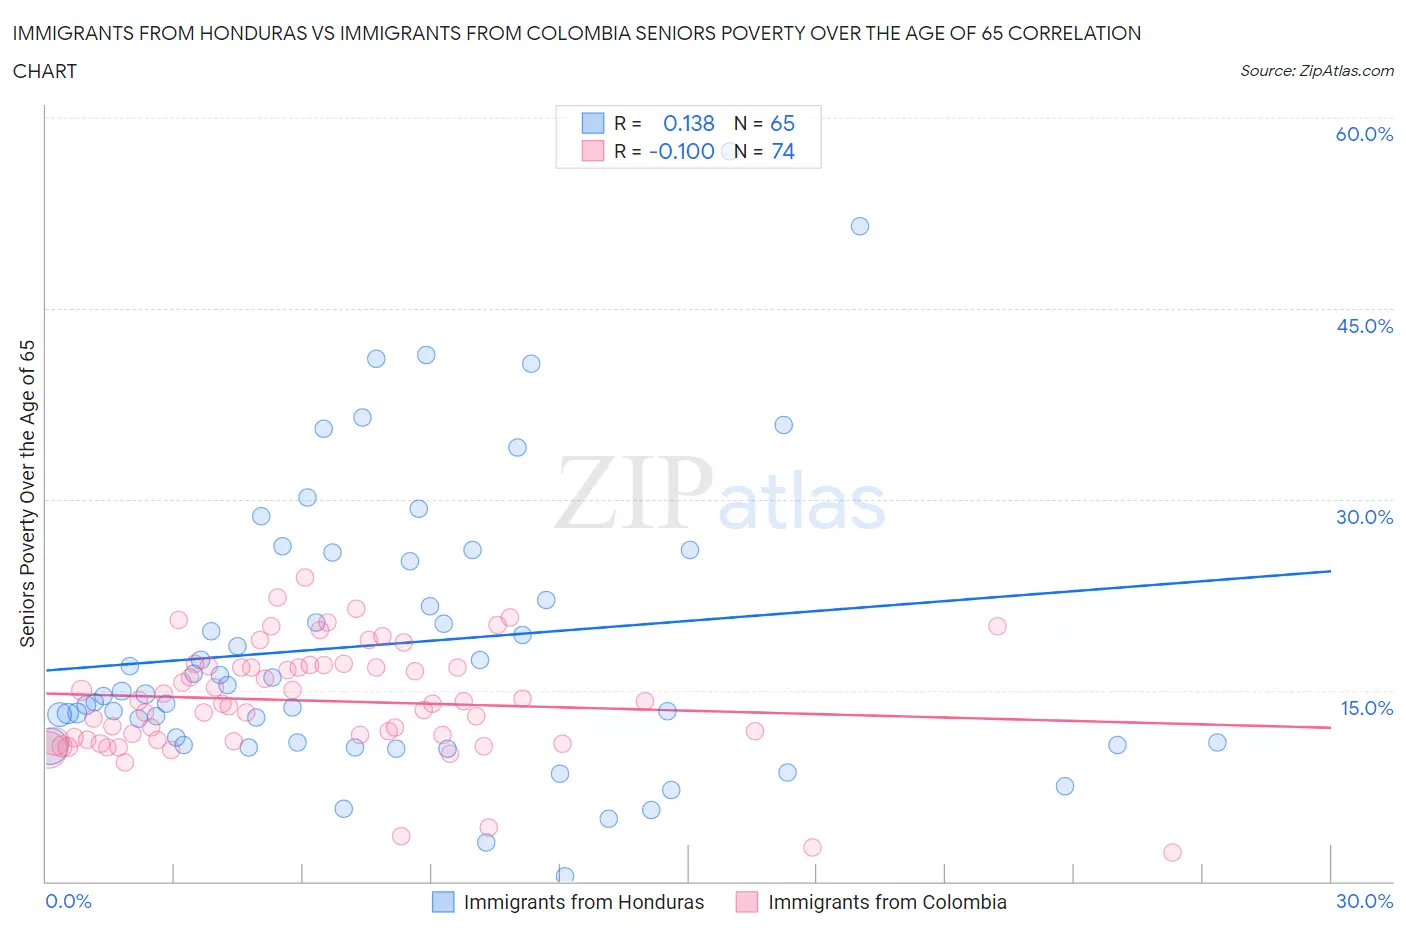 Immigrants from Honduras vs Immigrants from Colombia Seniors Poverty Over the Age of 65